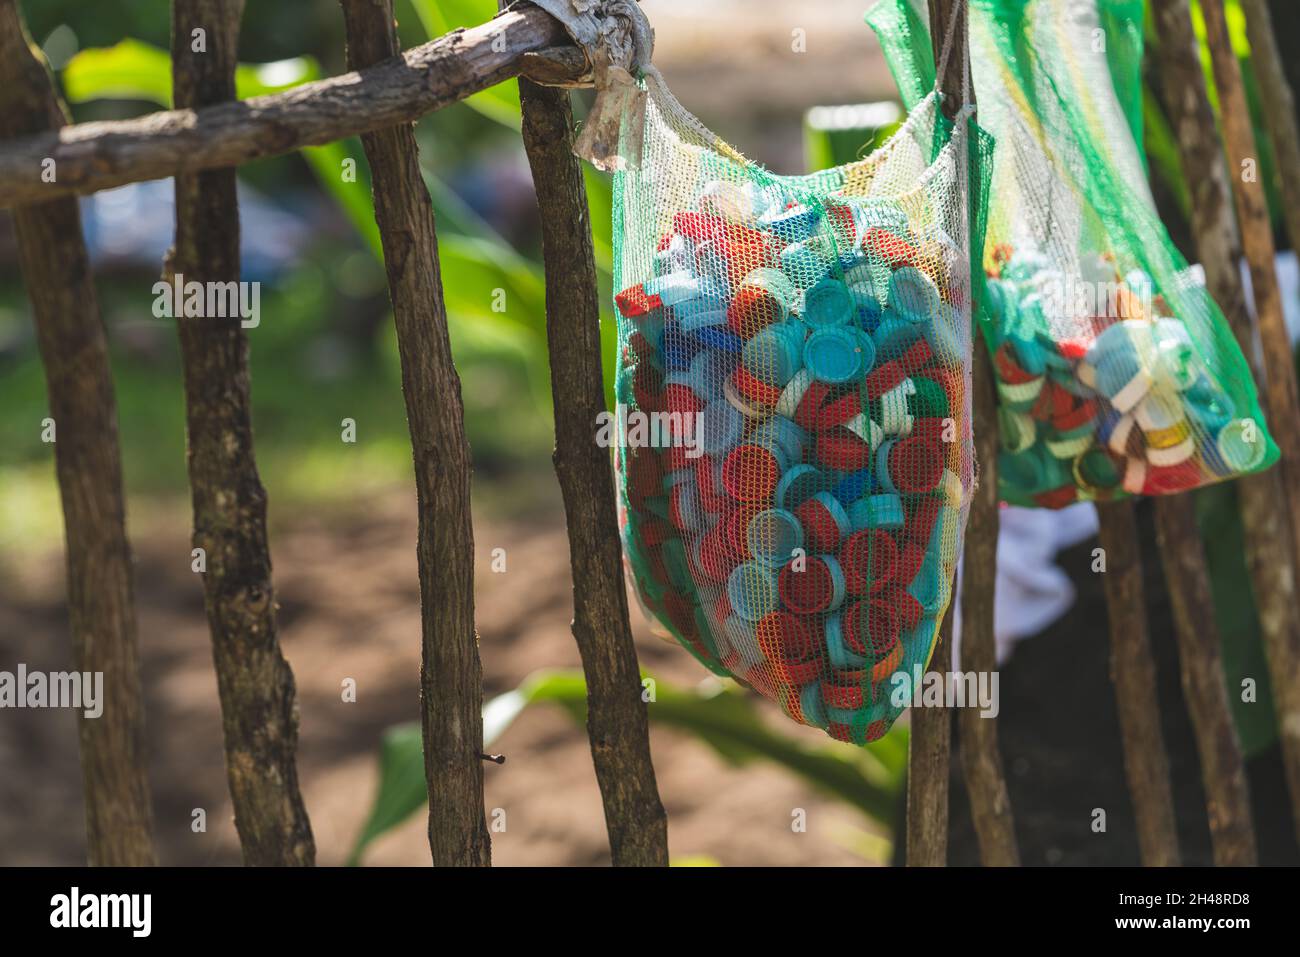 A lot of plastic bottle caps collected in a bag. Garbage that pollute the Earth. Stock Photo